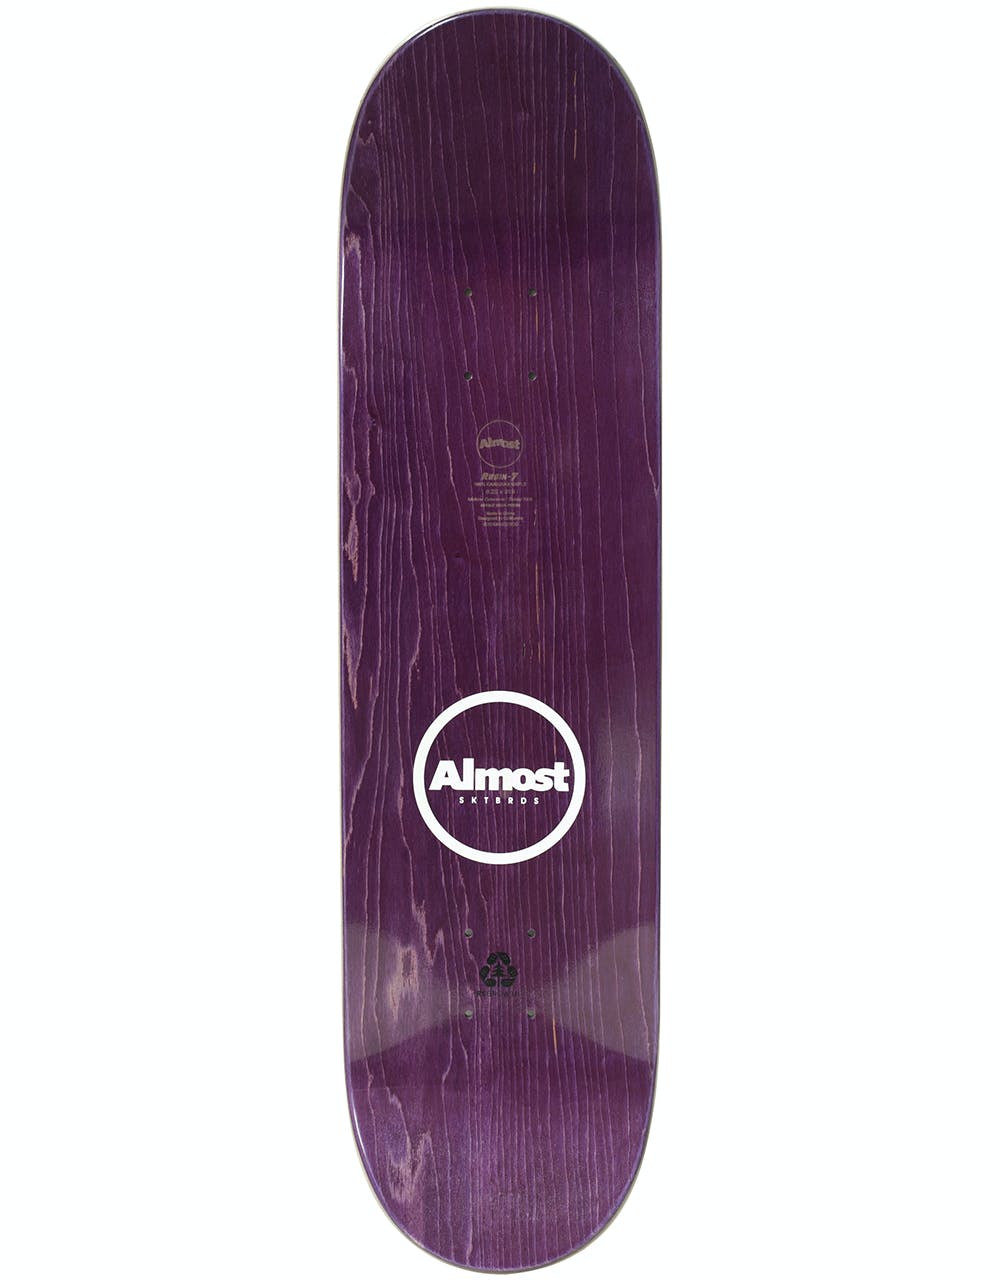 Almost Youness Cut & Paste R7 Skateboard Deck - 8.25"